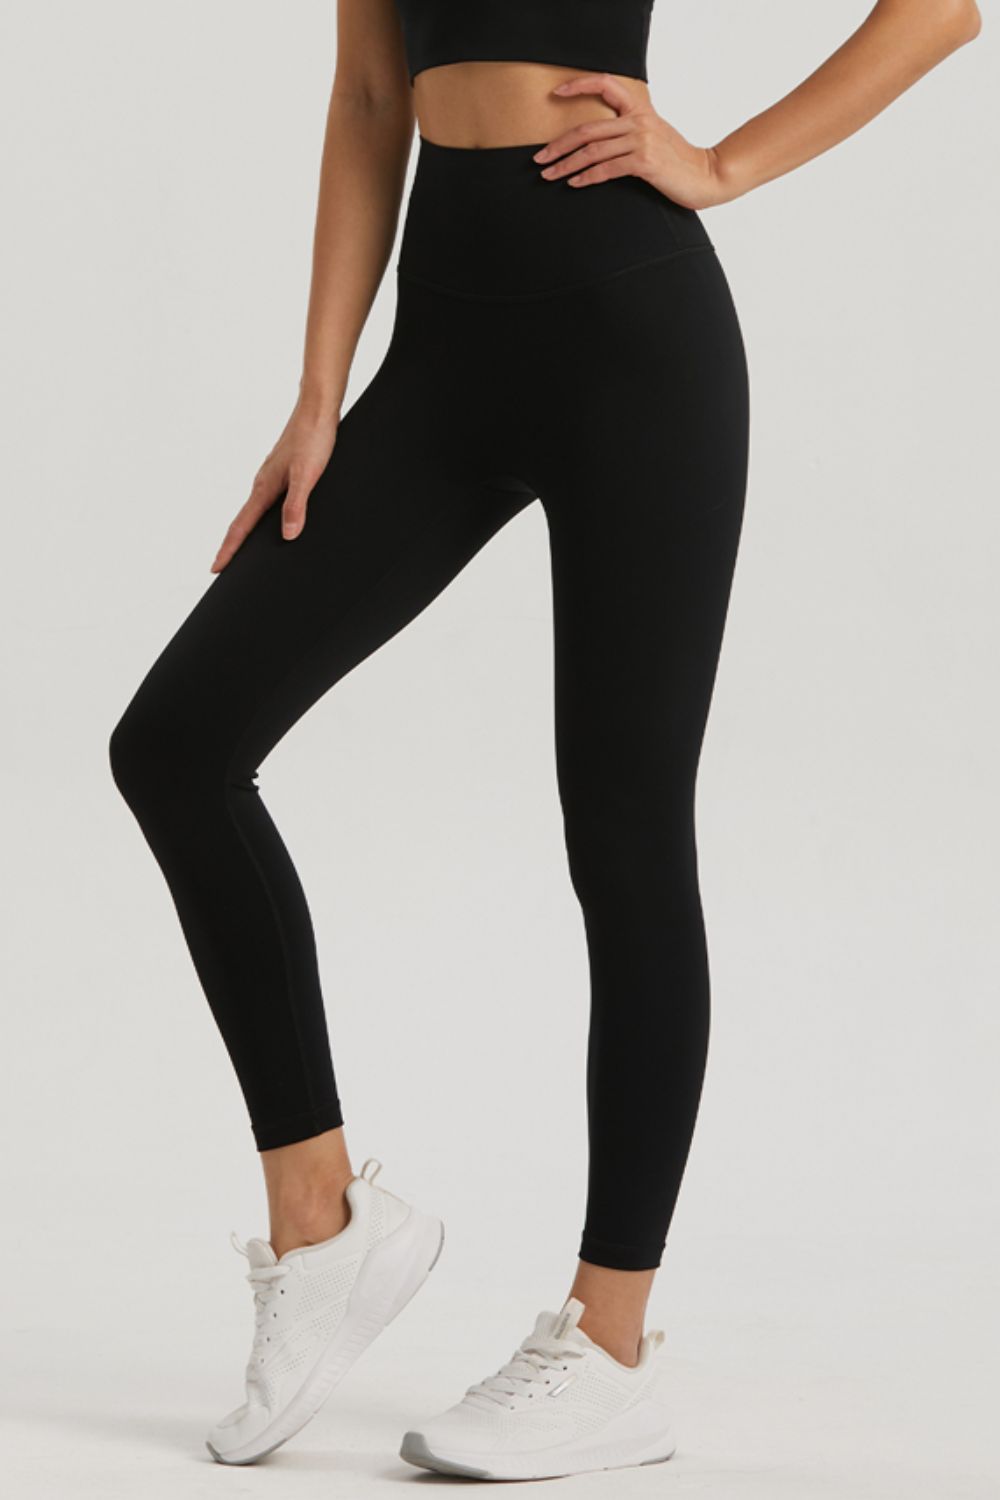 Wide Waistband Sports Leggings - Cheeky Chic Boutique